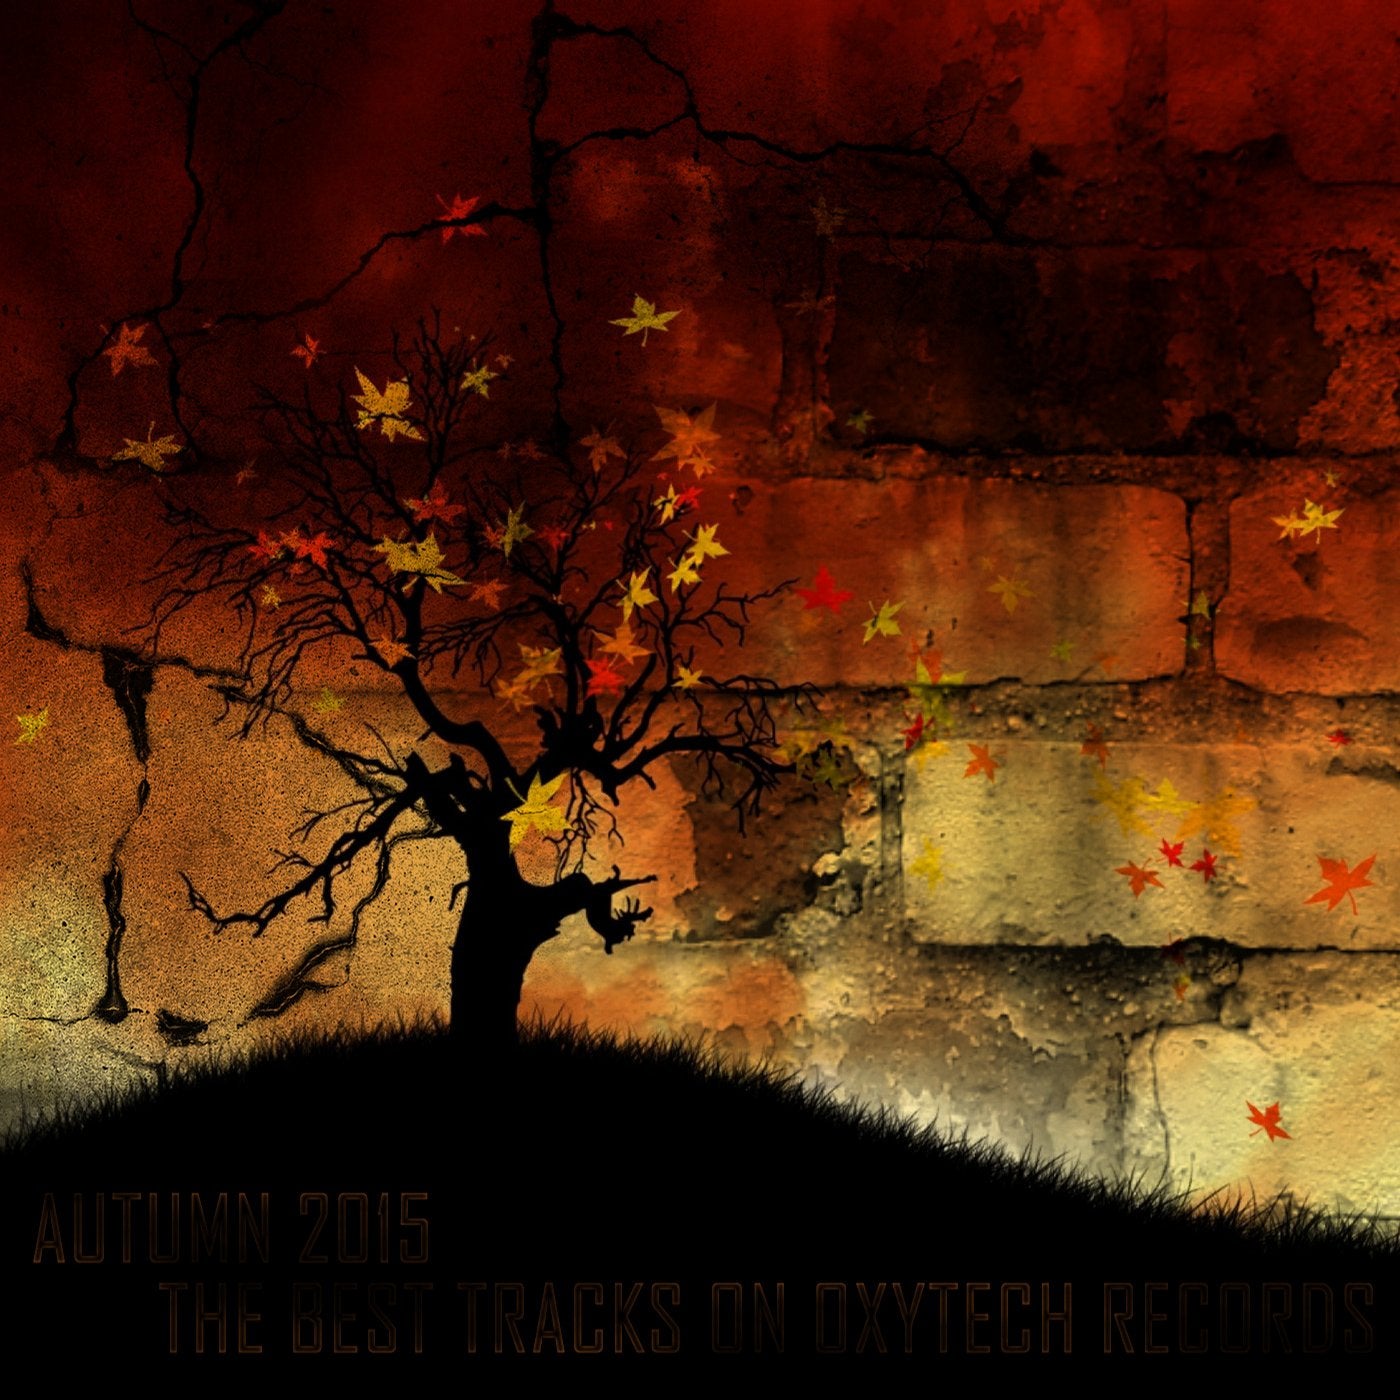 The Best Tracks on Oxytech Records. Autumn 2015